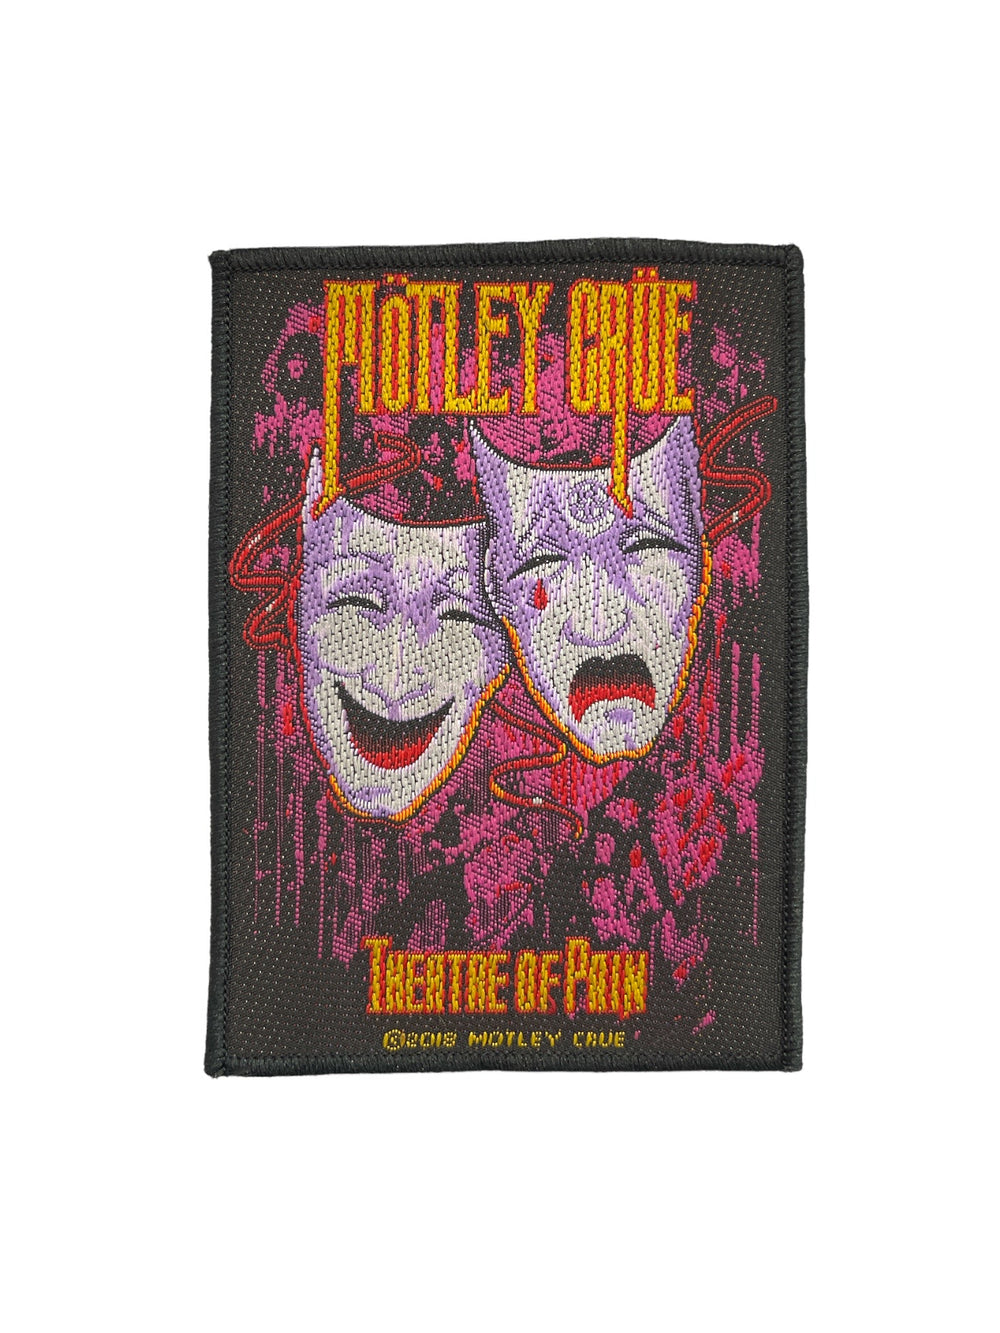 Motley Crue Theatre Of Pain Official Woven Patch Brand New